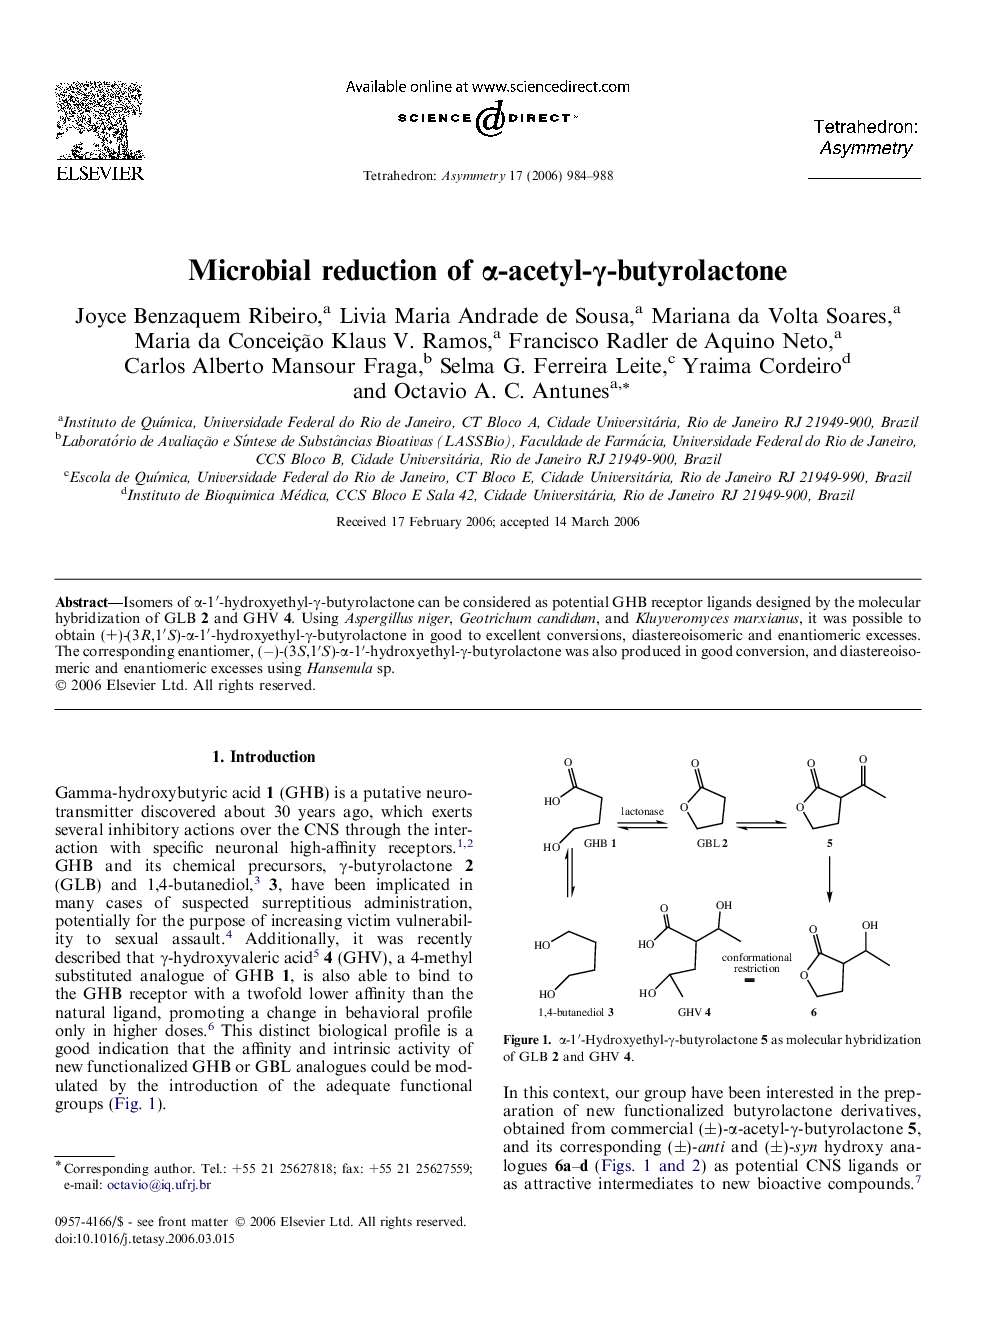 Microbial reduction of α-acetyl-γ-butyrolactone